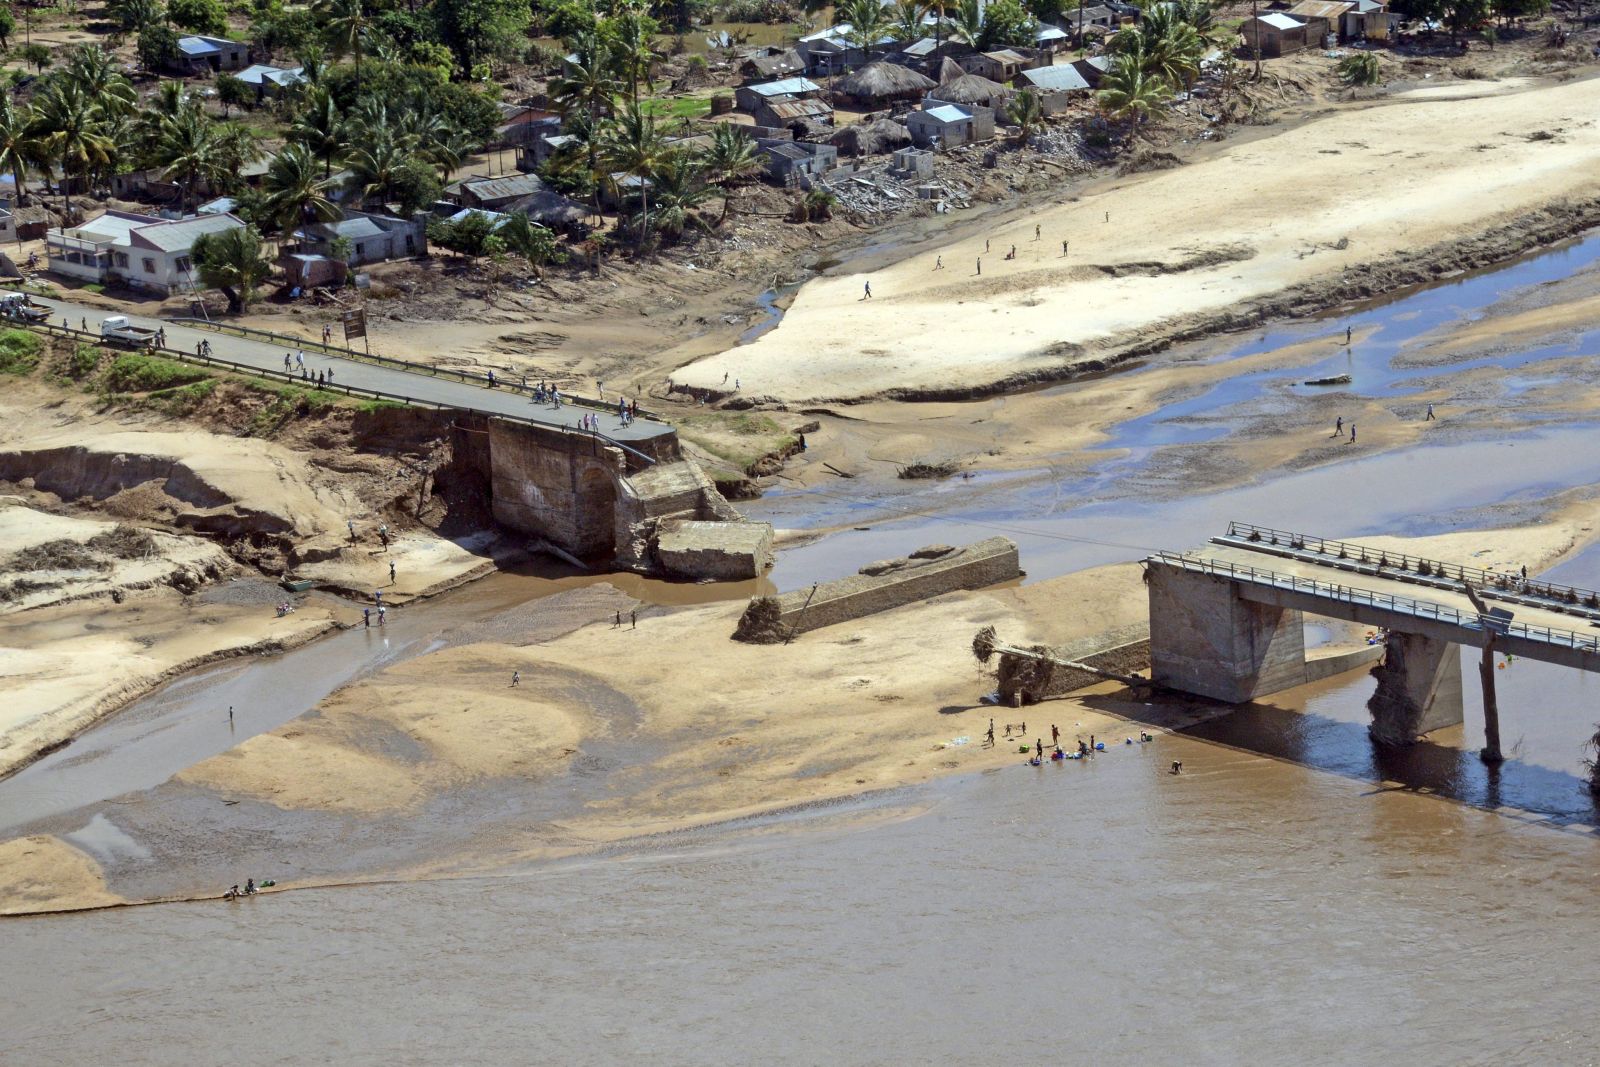 Africa must prepare for flooding: a flood-destroyed bridge in Mozambique in 2015.